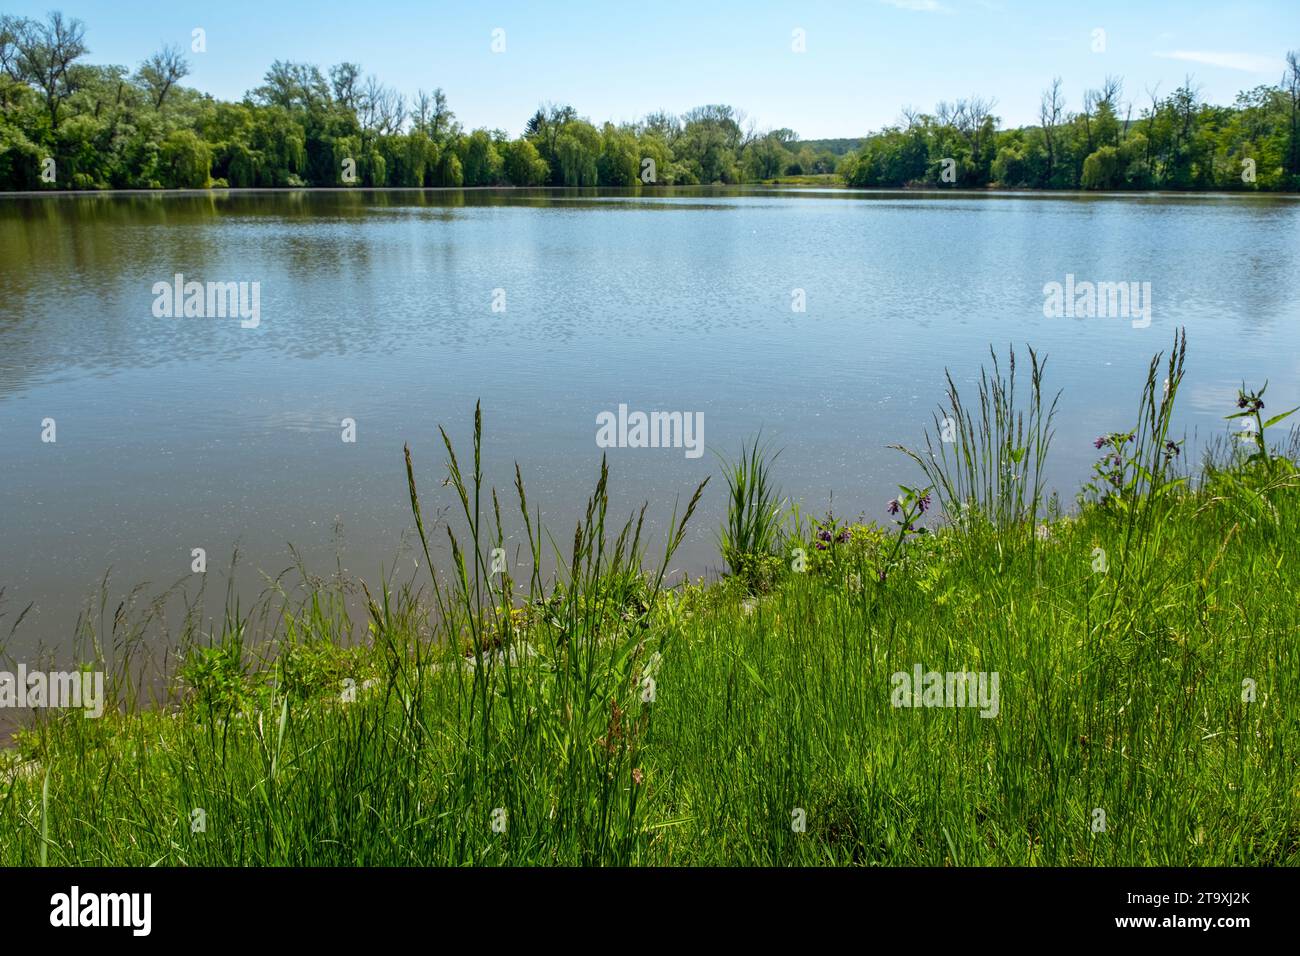 sunlit landscape around the pond, plants and trees around the lake Stock Photo